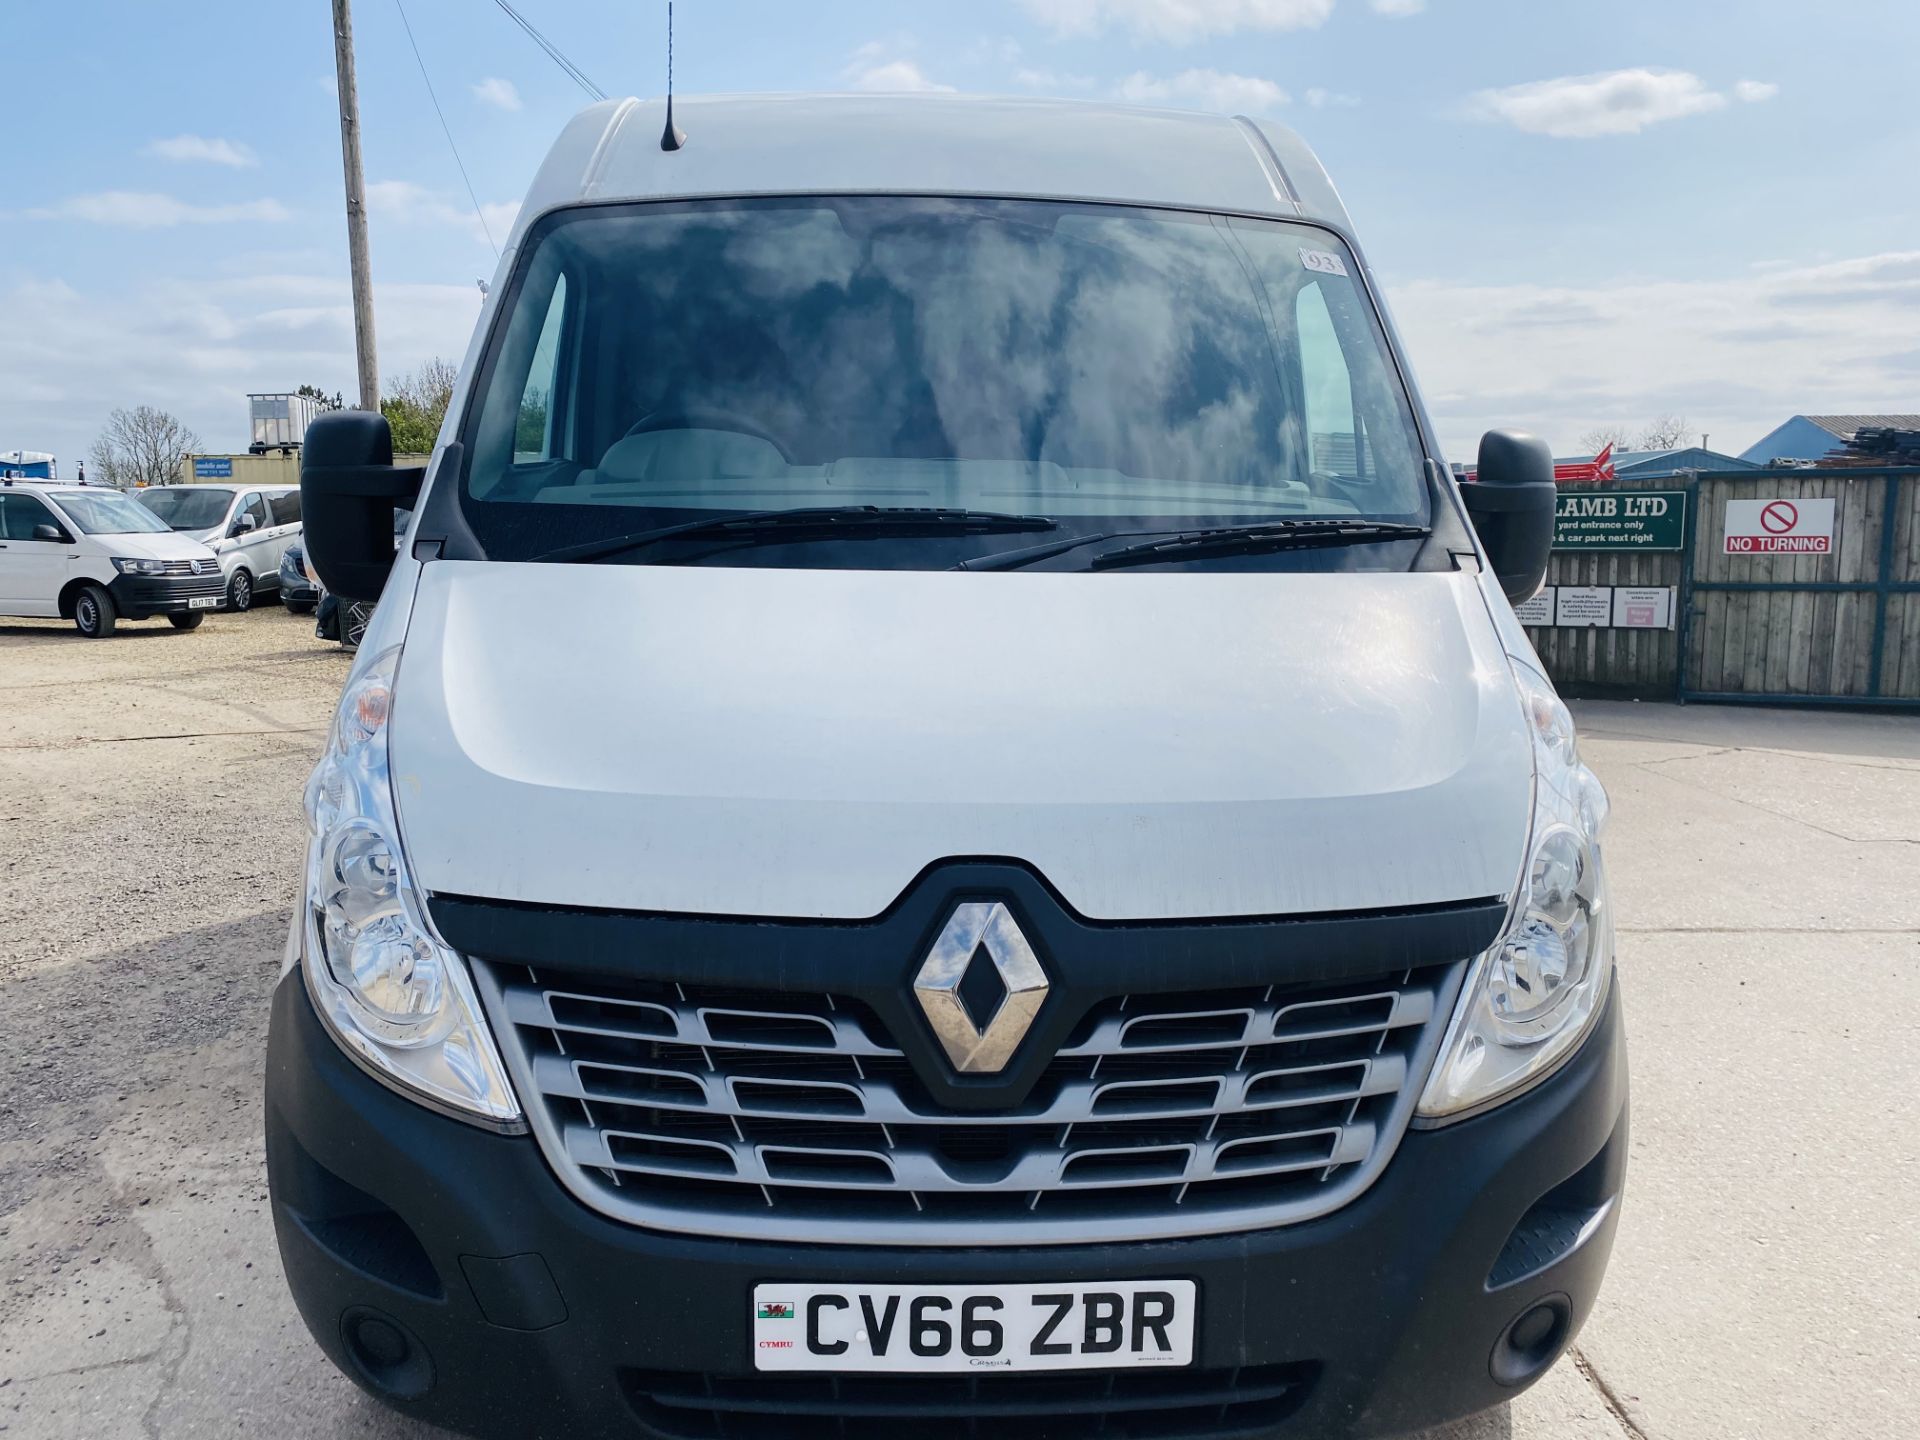 ON SALE RENAULT MASTER MM35 BUSINESS + 2.3DCI (130) EURO 6 "ULEZ COMPLIANT"MWB- 2017 MODEL - AIR CON - Image 4 of 17